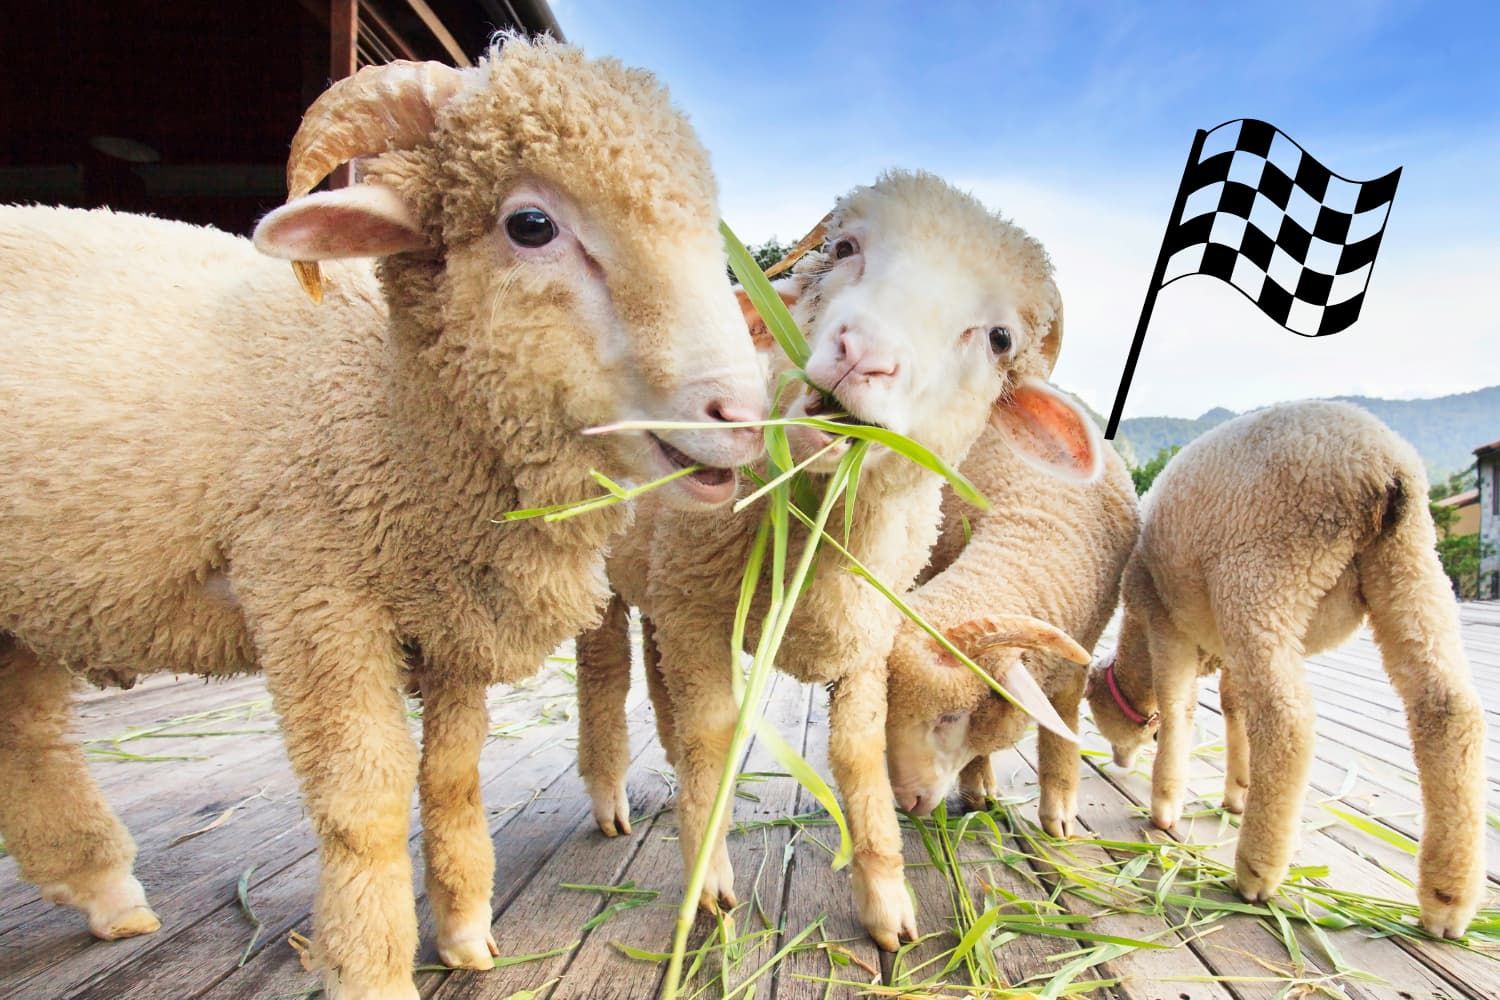 Game%20-%20OT%20Psalm%2023%20-%20The%20feed%20the%20sheep%20relay%20race-6bb58723 Thankfulness